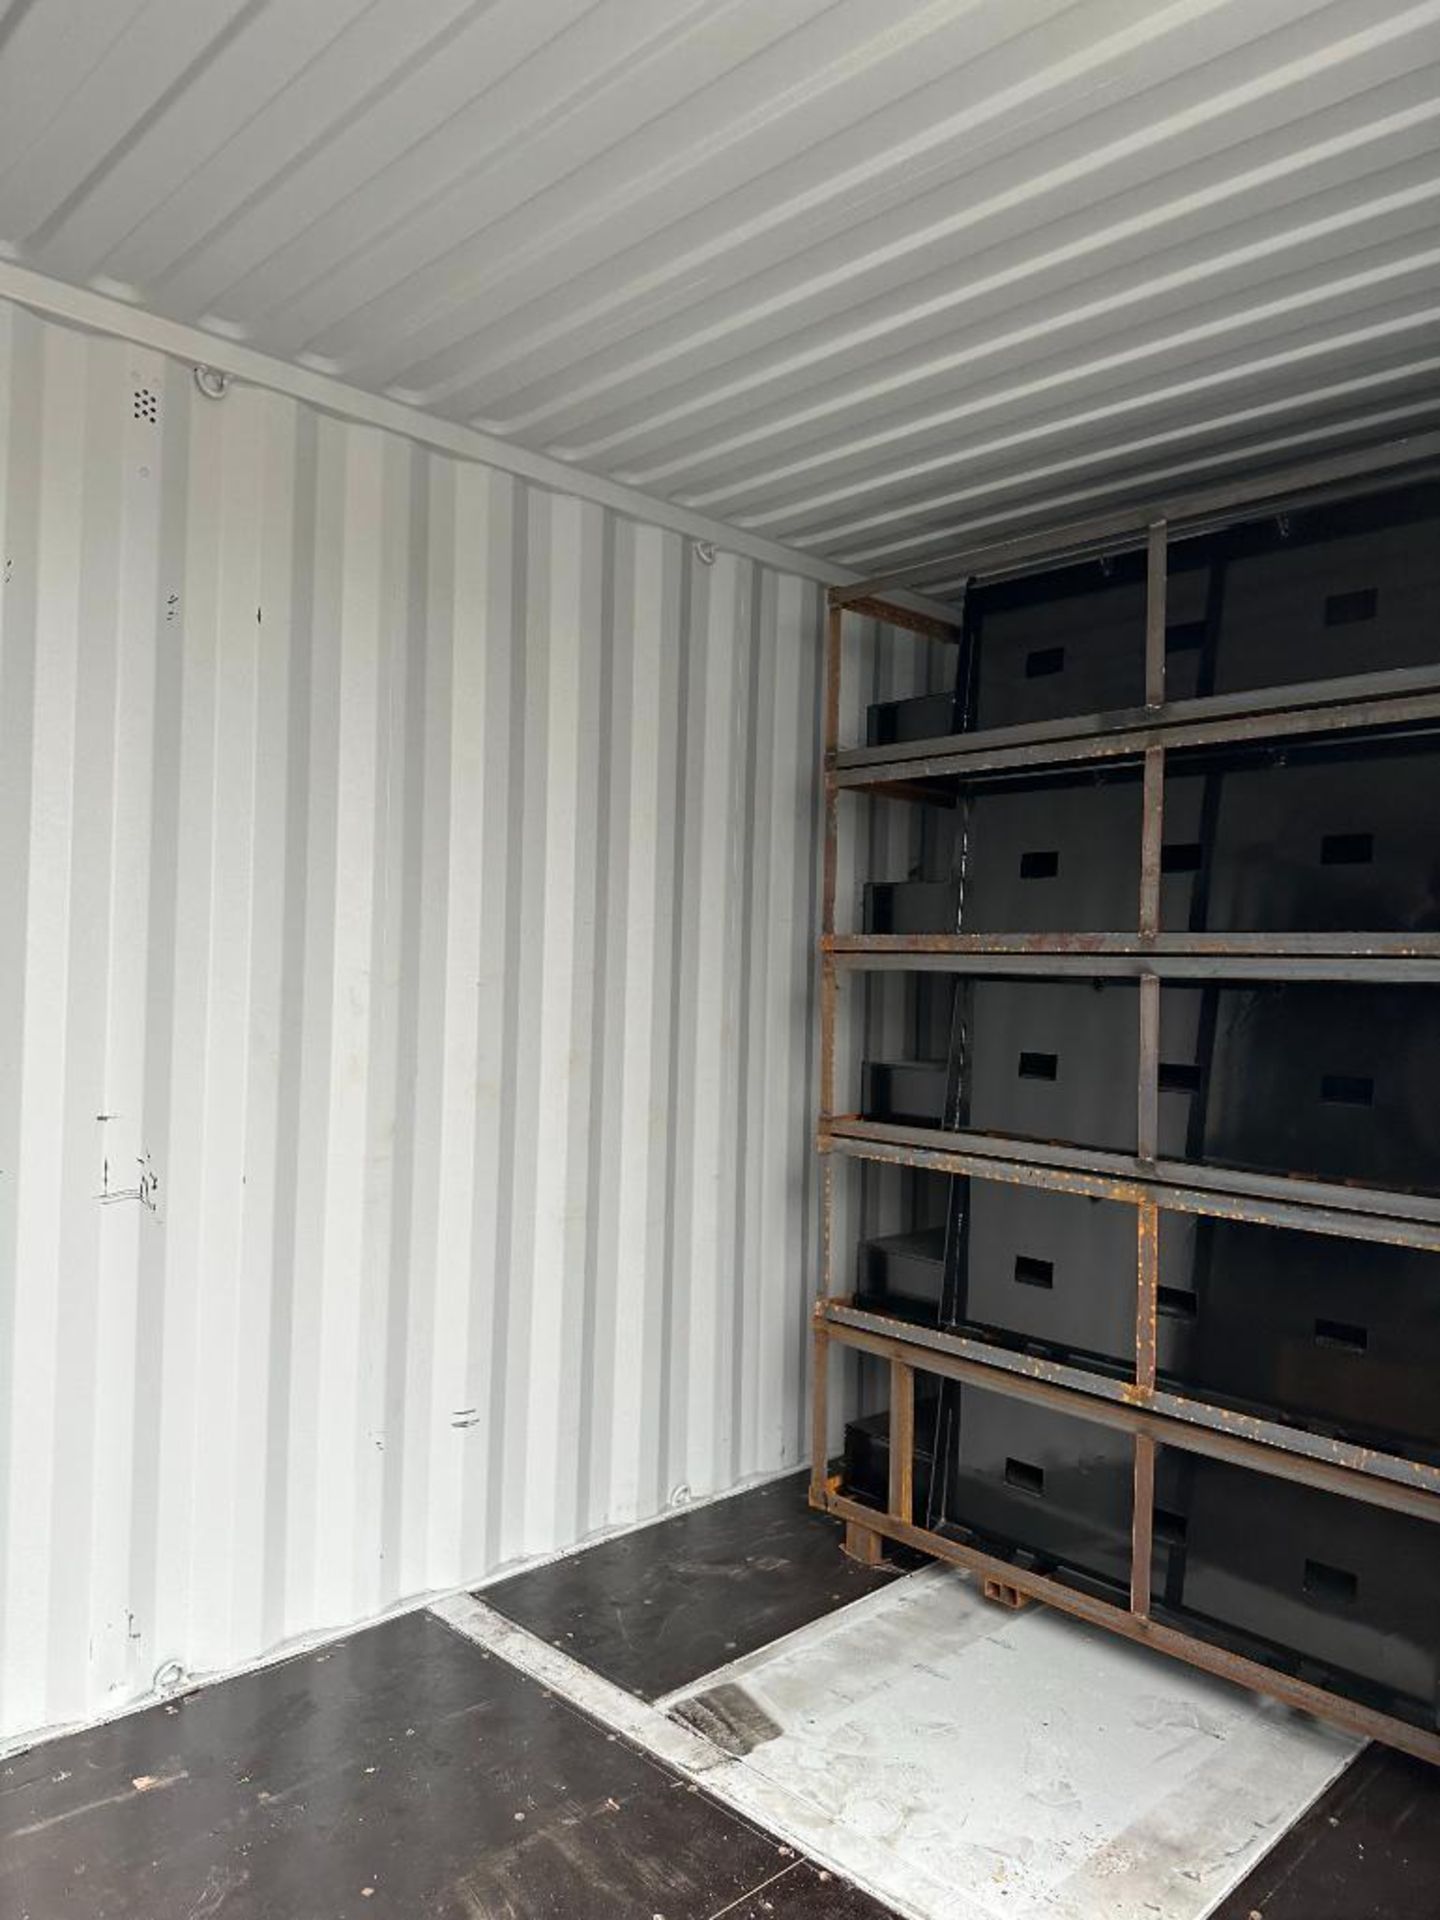 2022 40FT MULTI-DOOR SHIPPING CONTAINER BRAND/MODEL: LYGU 45G3 INFORMATION: NEW,2022 STORAGE CONTAIN - Image 17 of 23